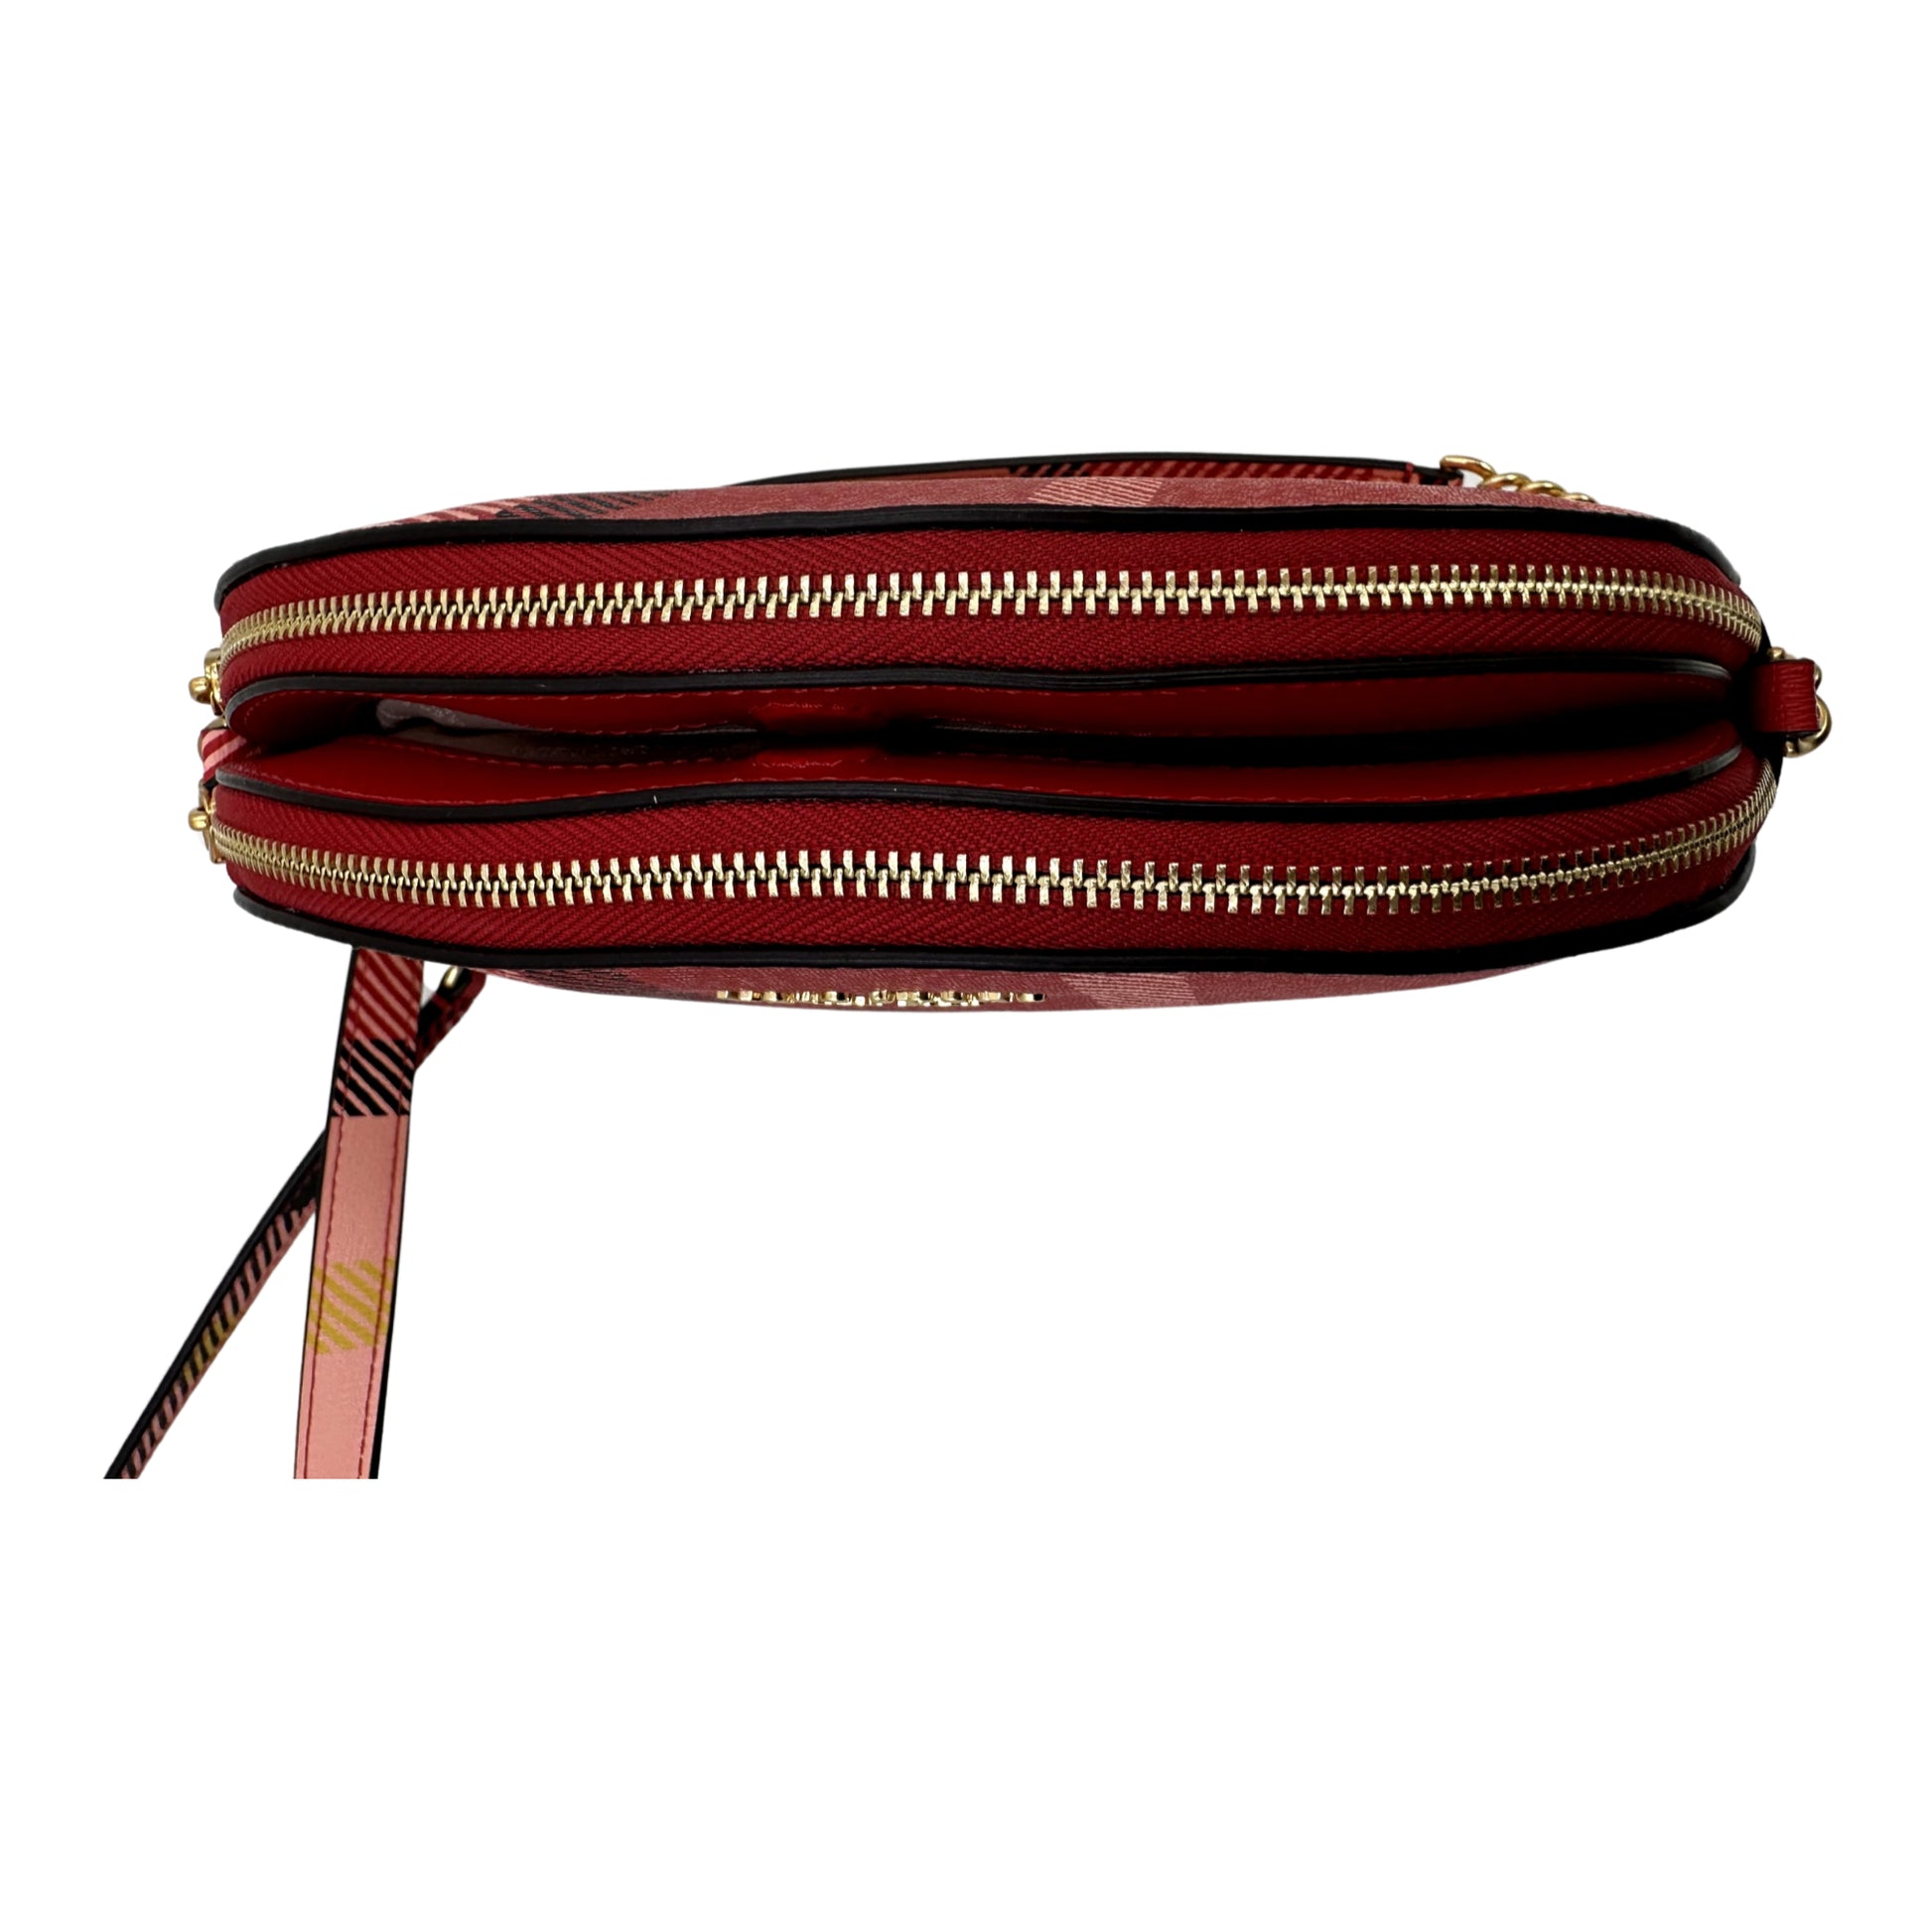 Kate Spade New York Morgan Museum Plaid Double Zip Dome Women's Small Crossbody - Red Multi - 196021356032